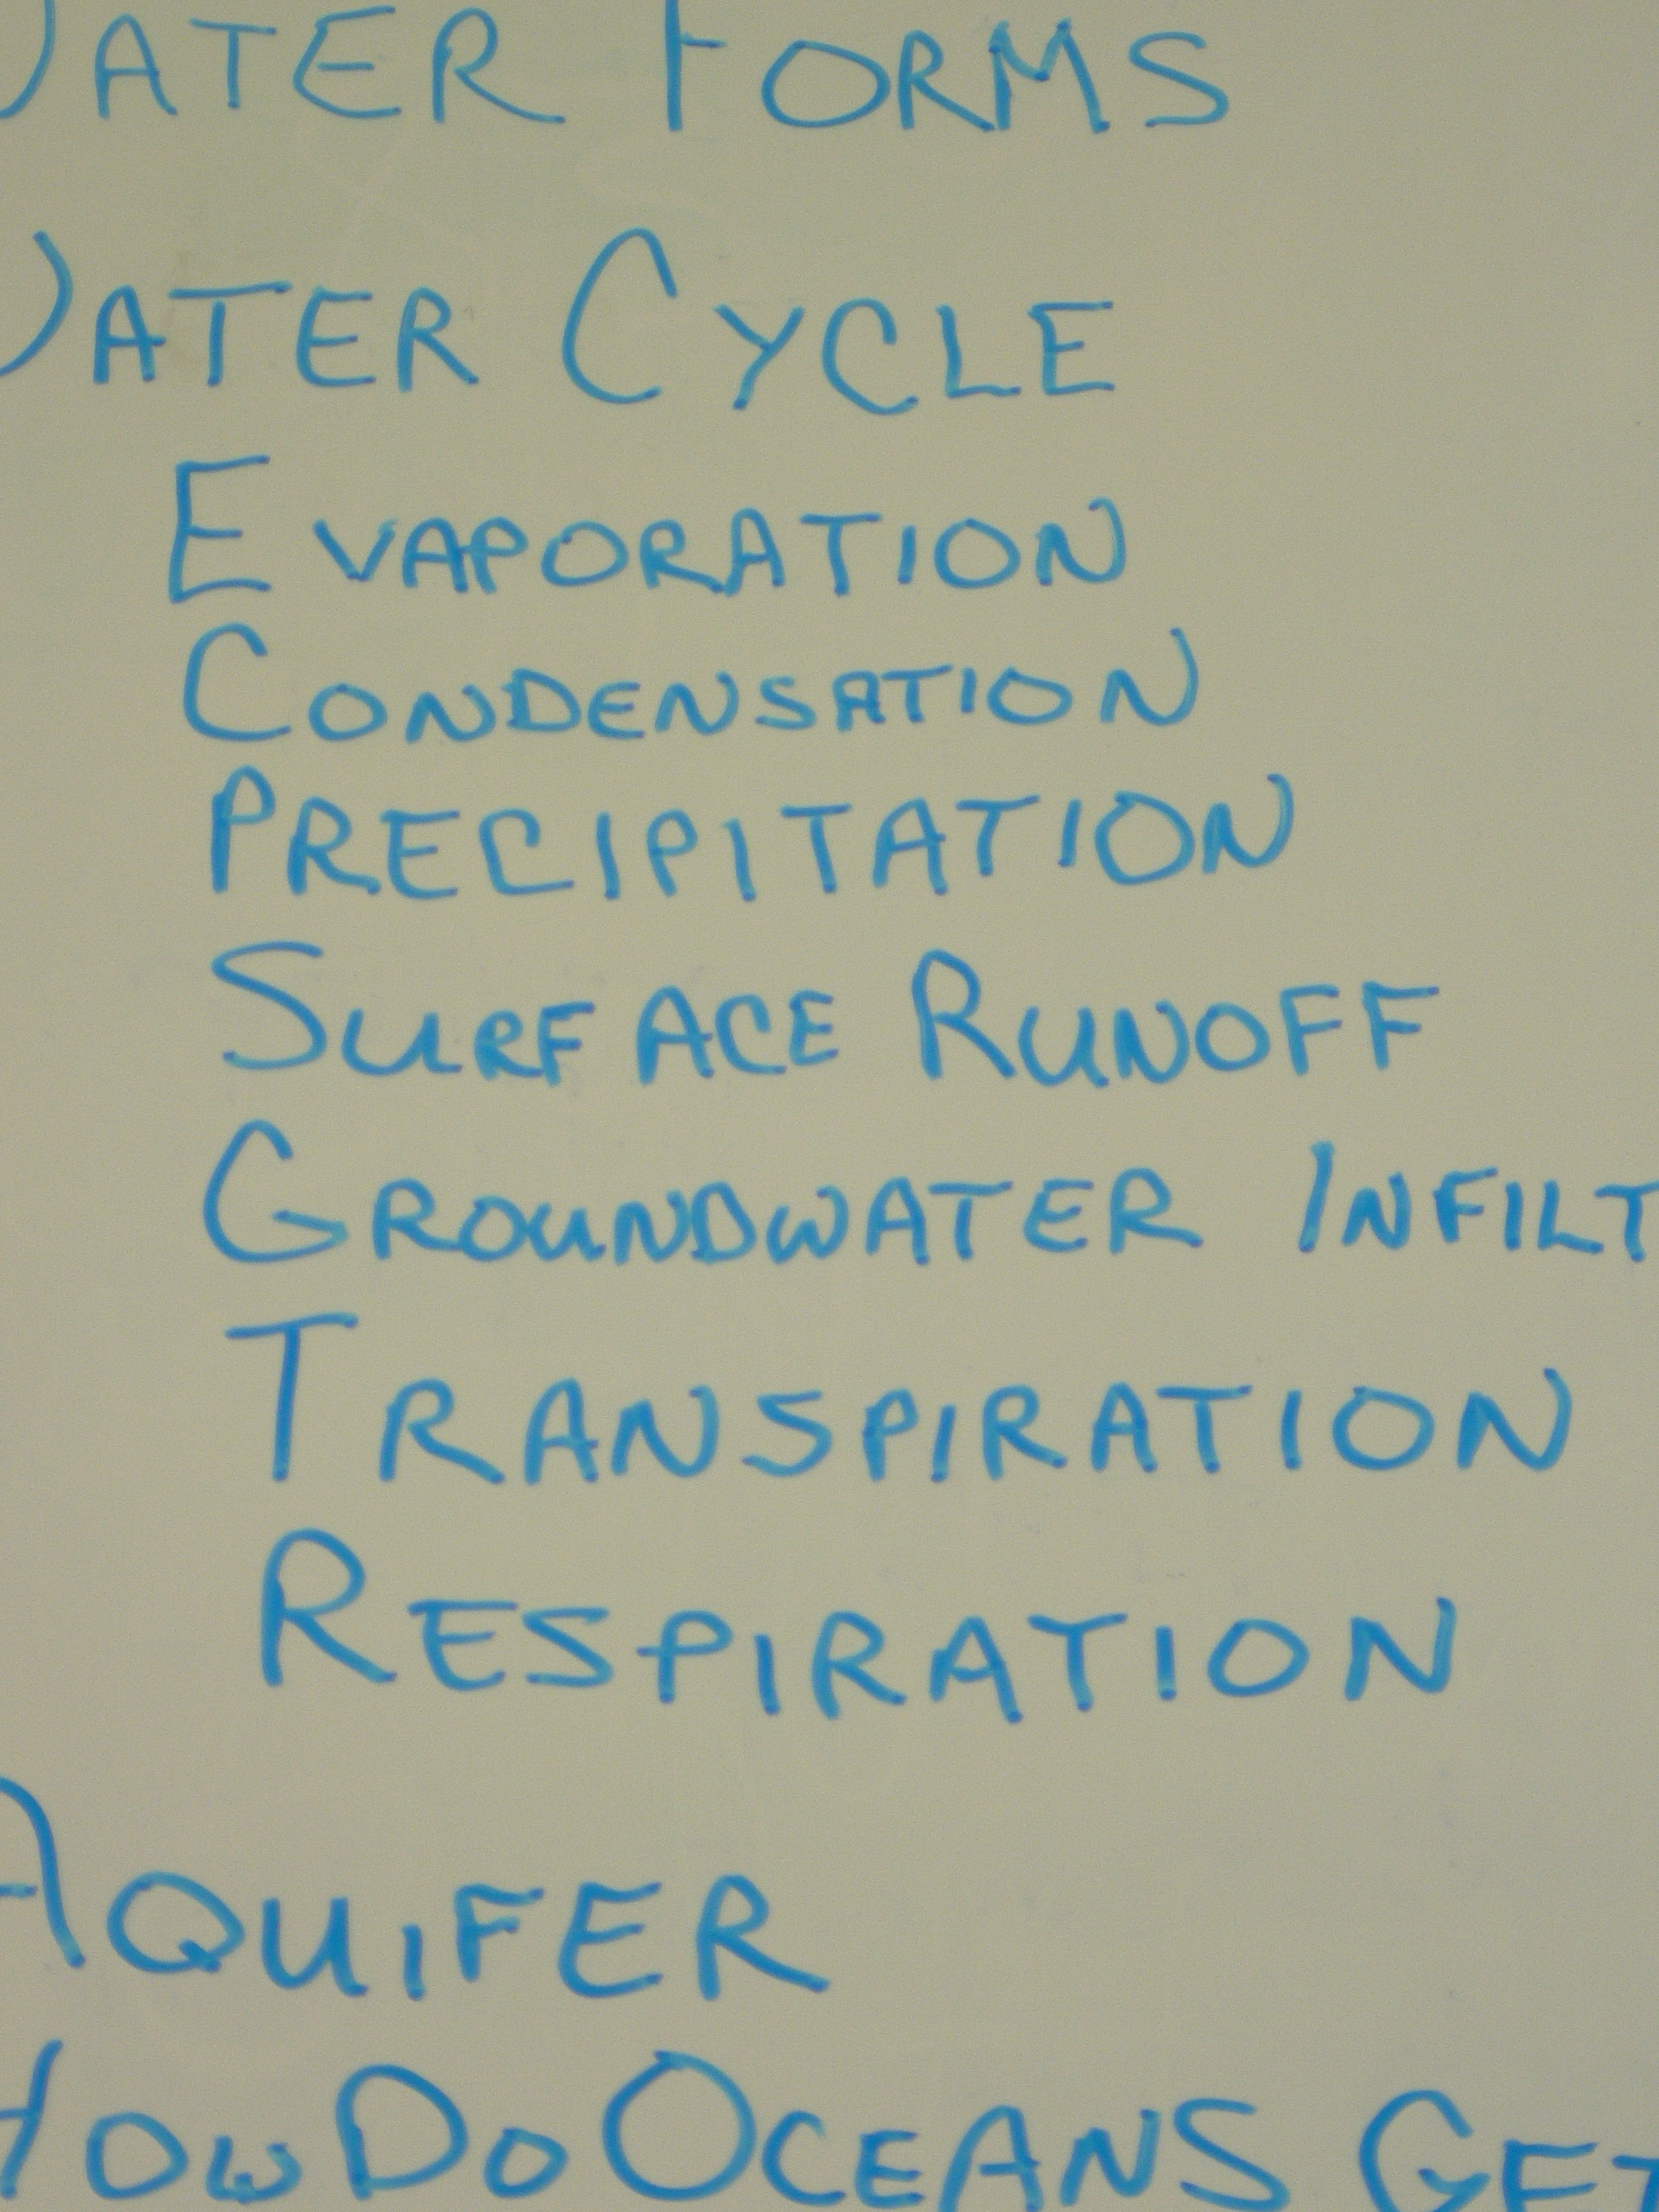 Elements of the water cycle